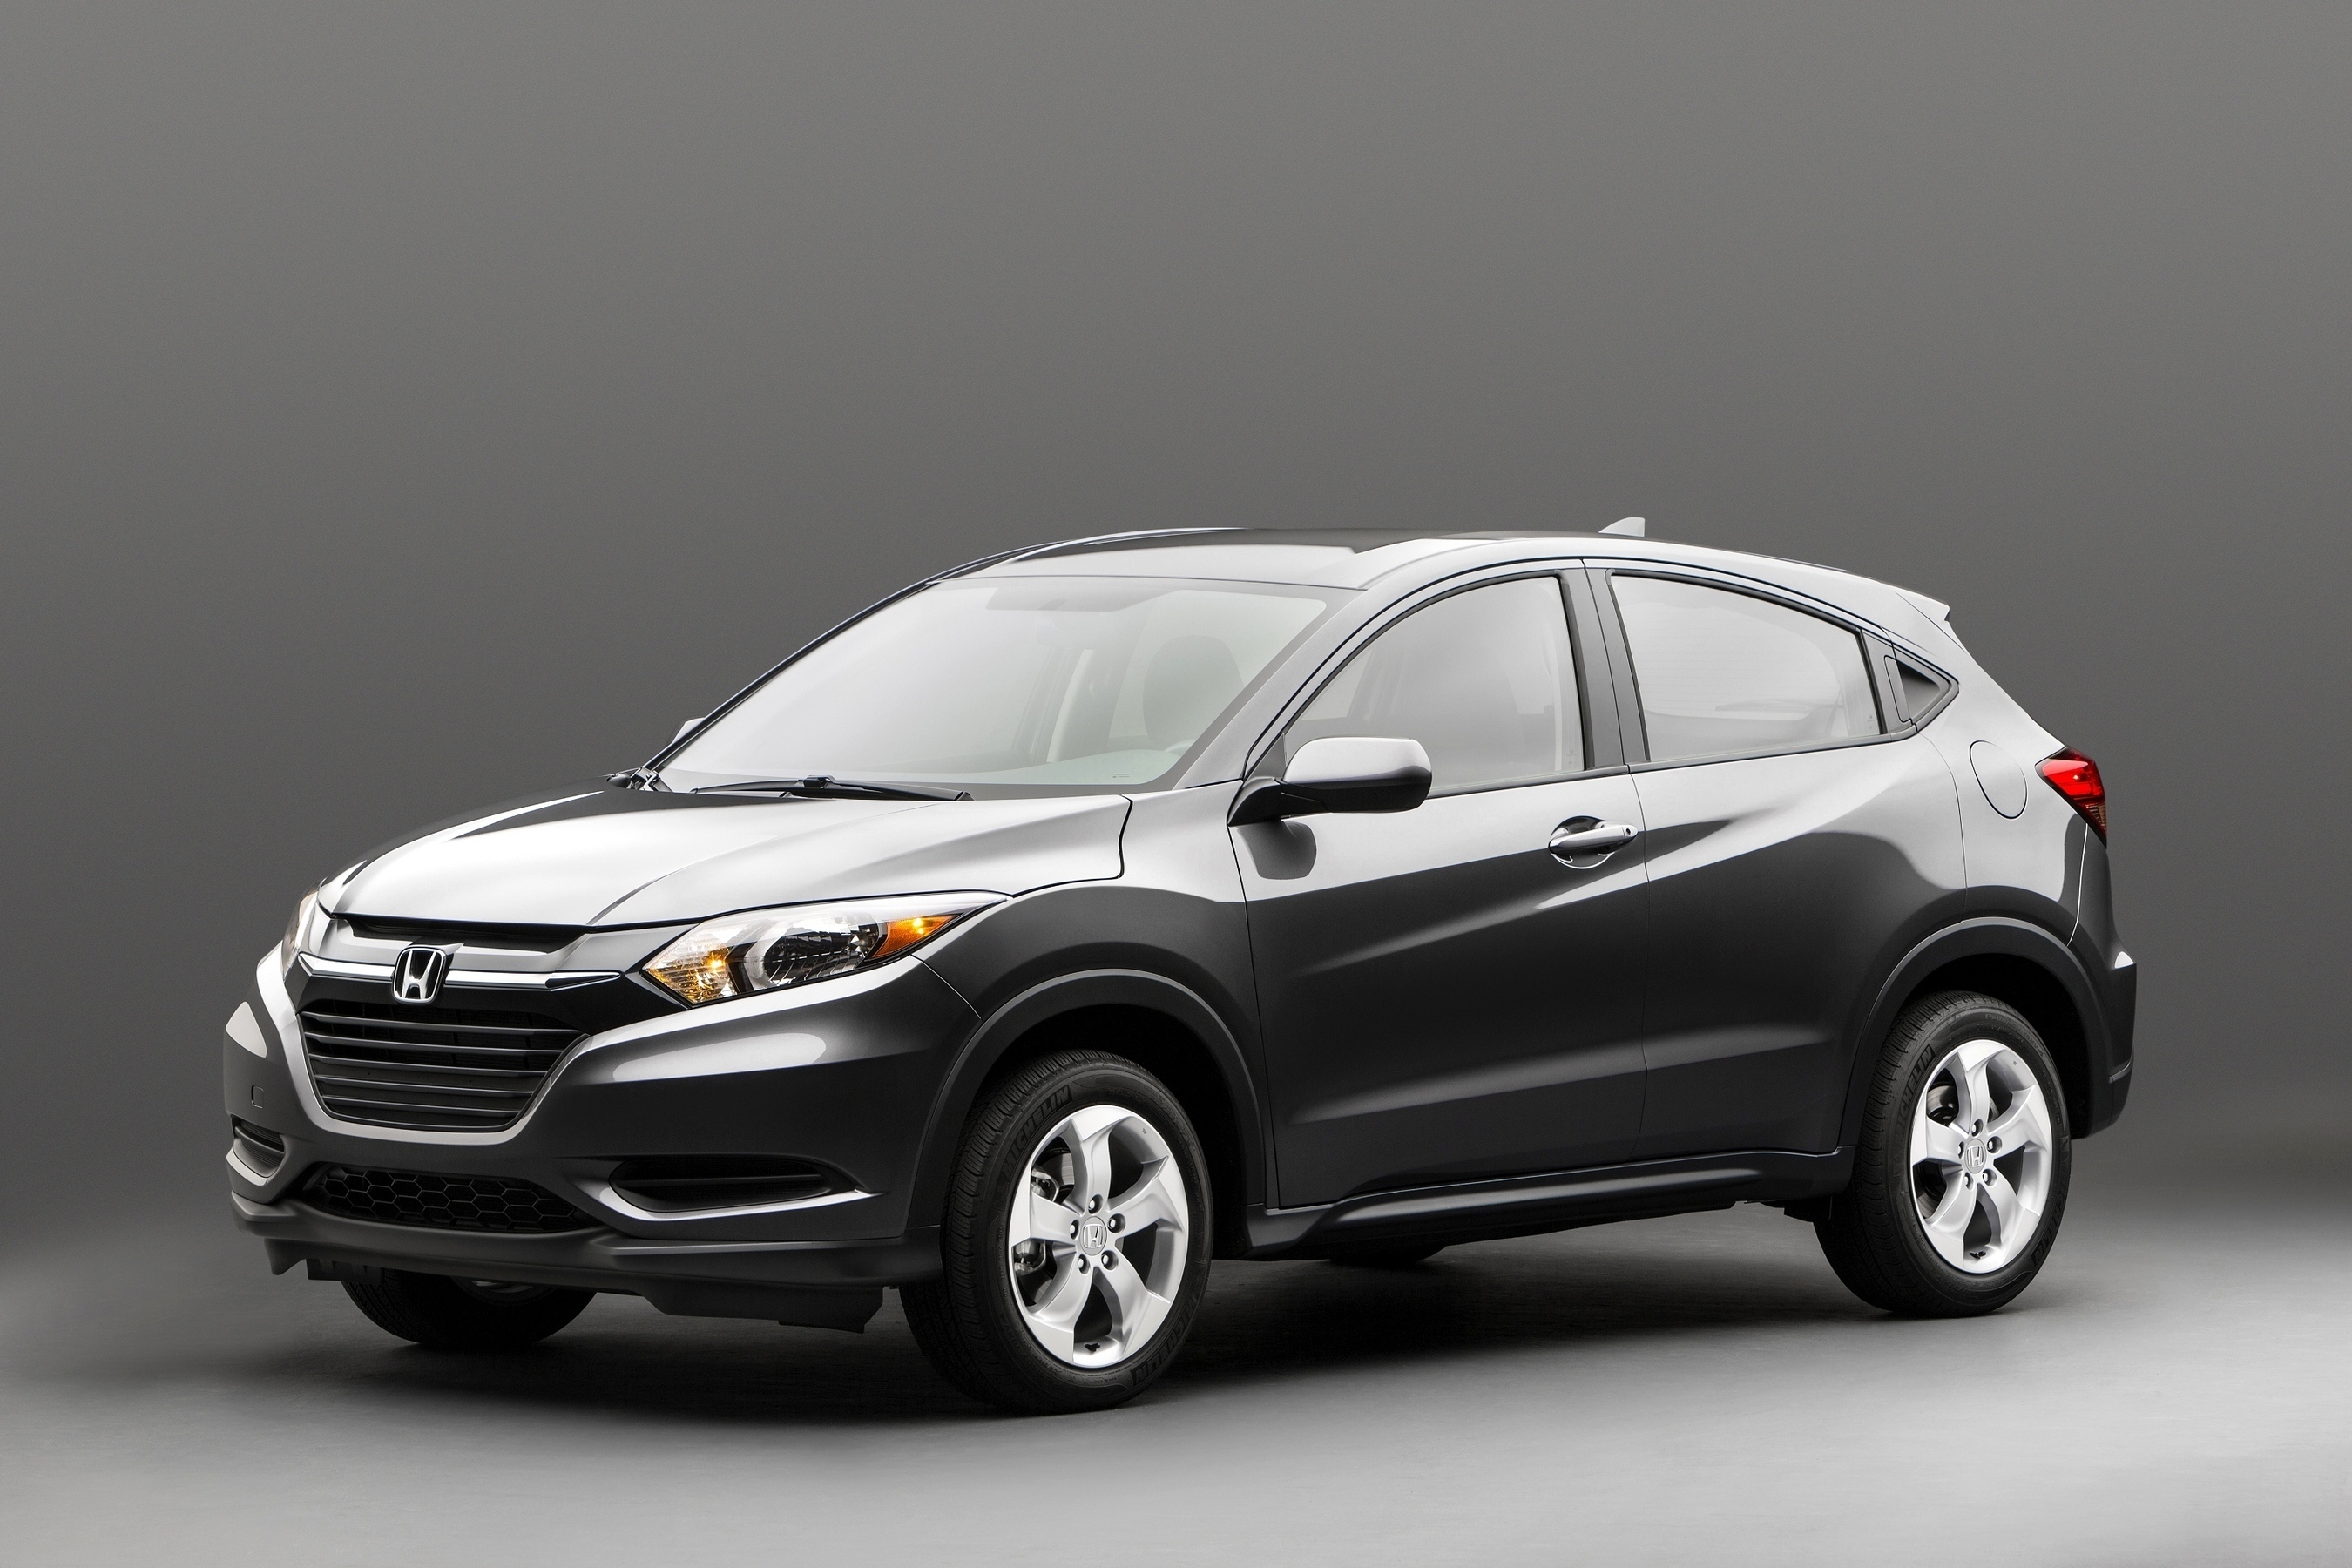 New Honda HR-V compact SUV to be launched this Winter (PRNewsFoto/American Honda Motor Co., Inc.)